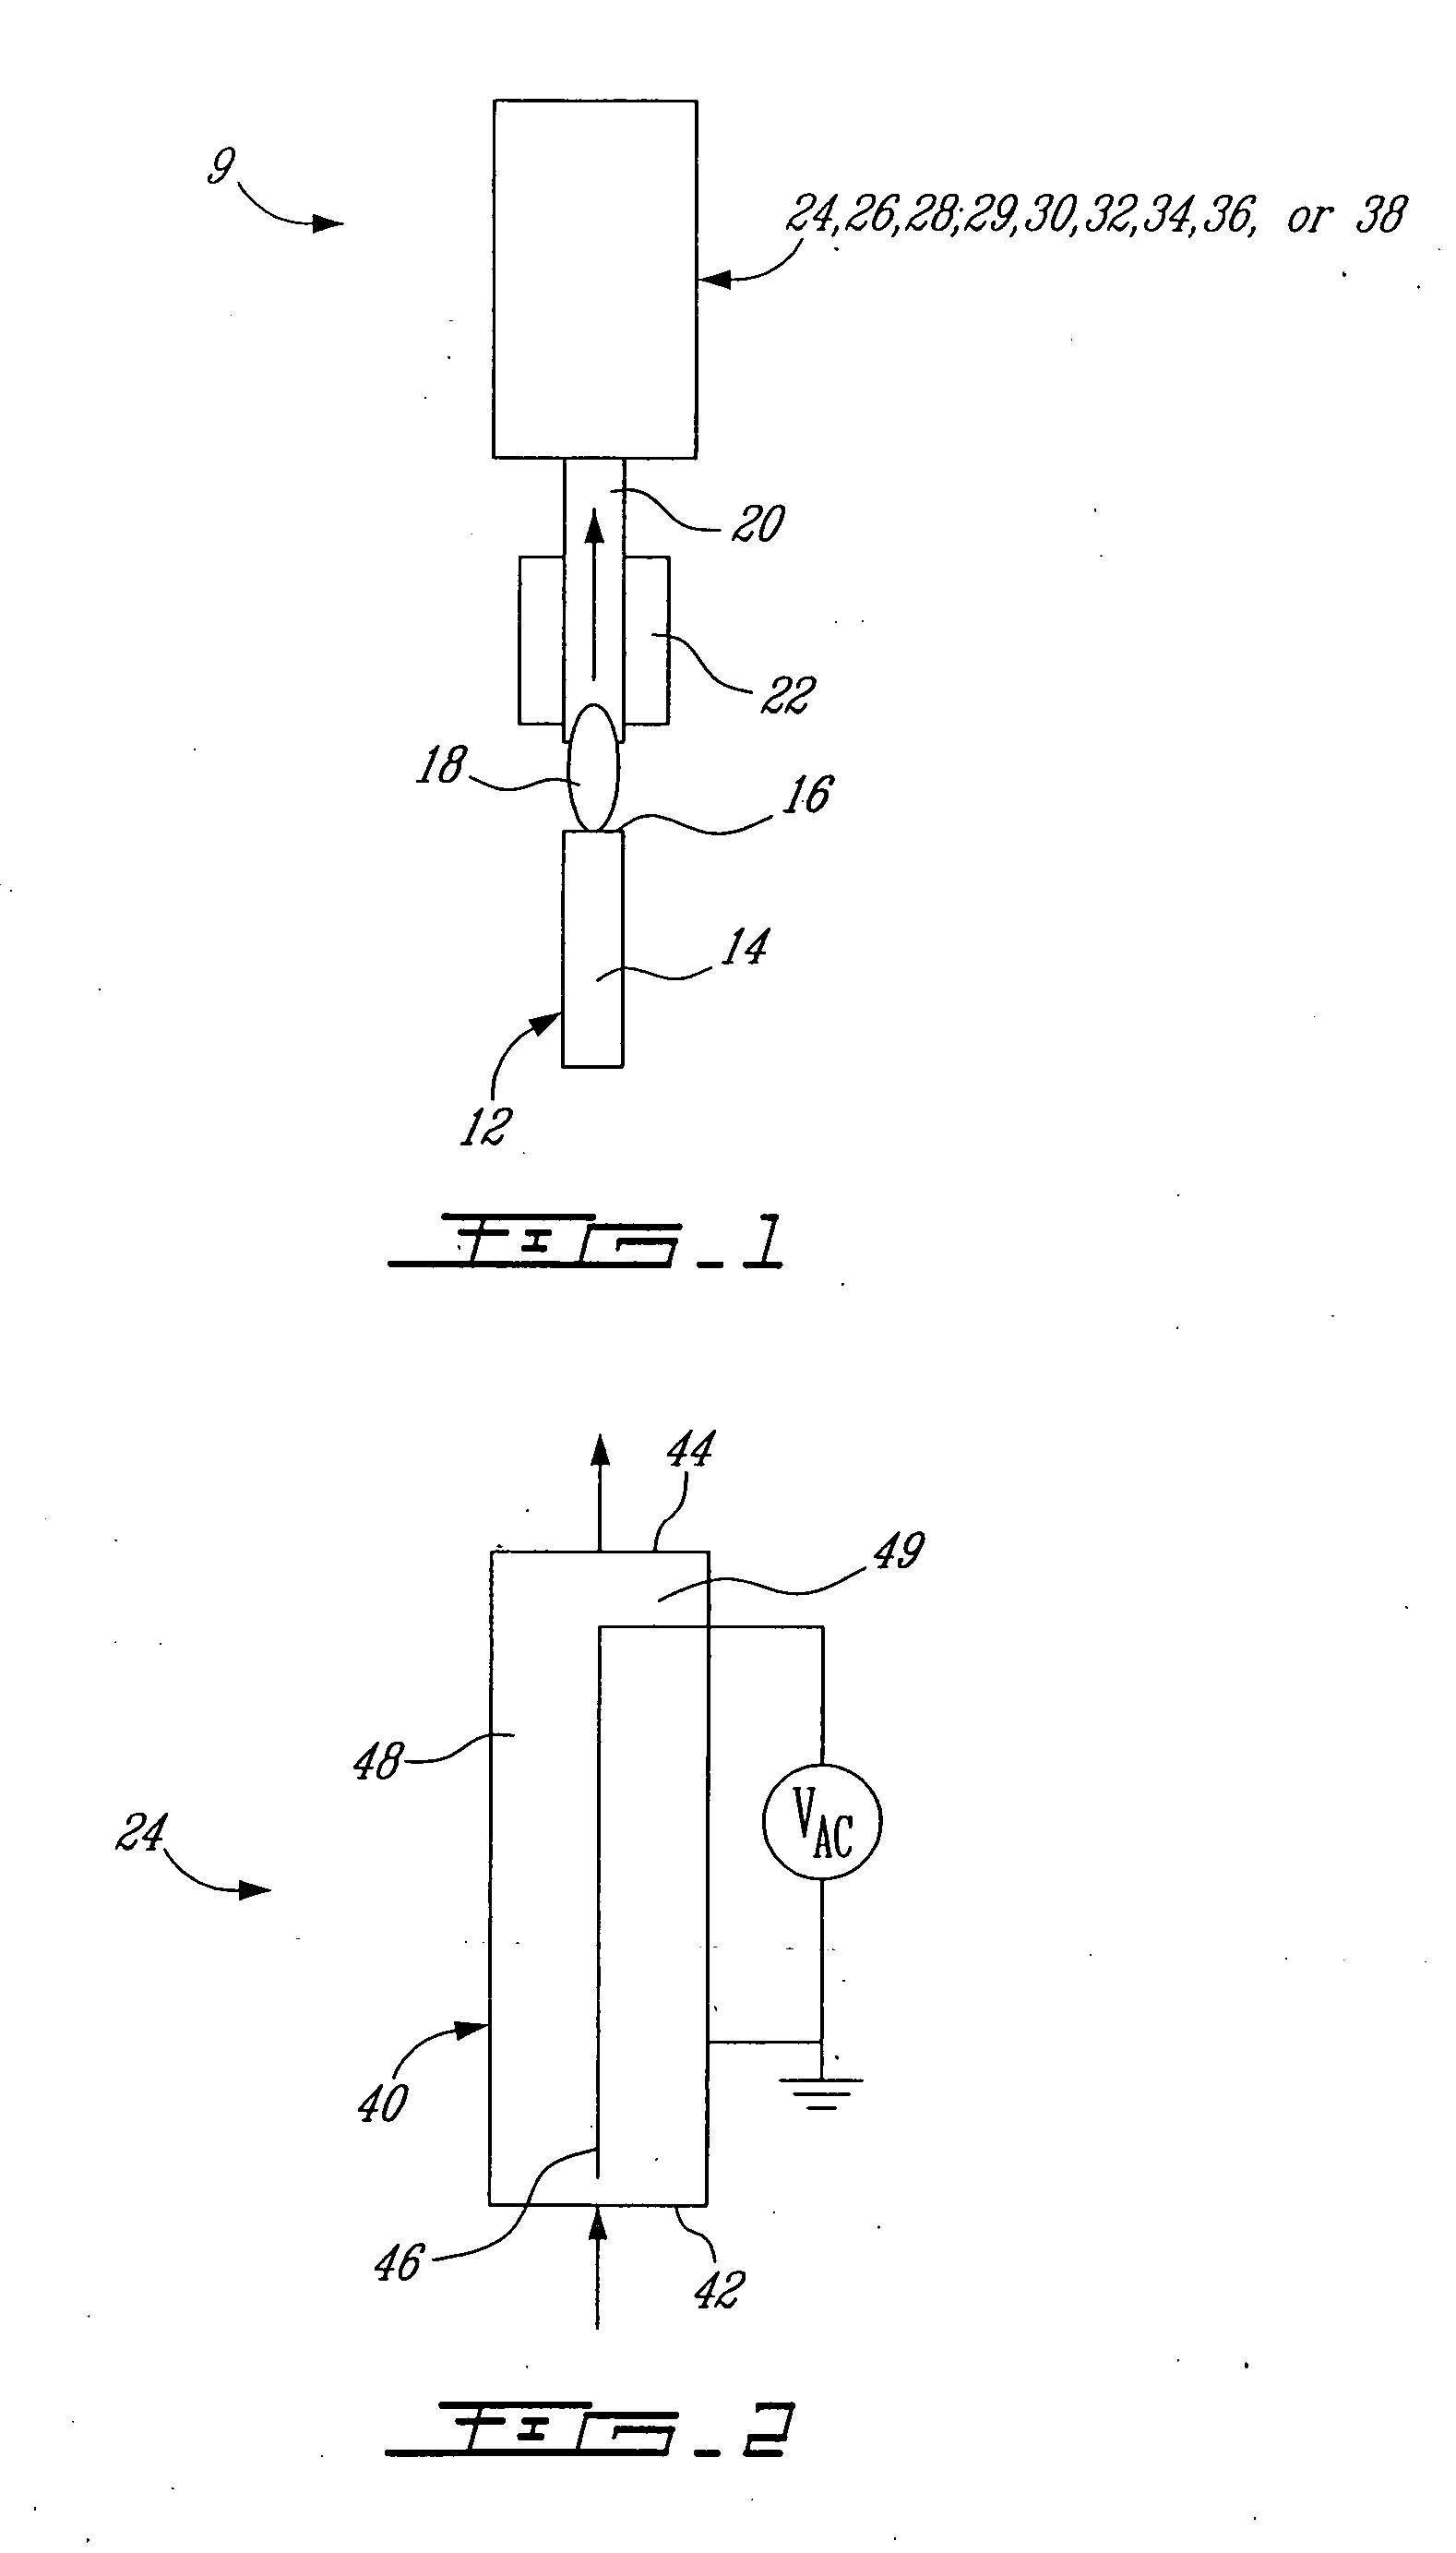 Methods and apparatuses for purifying carbon filamentary structures